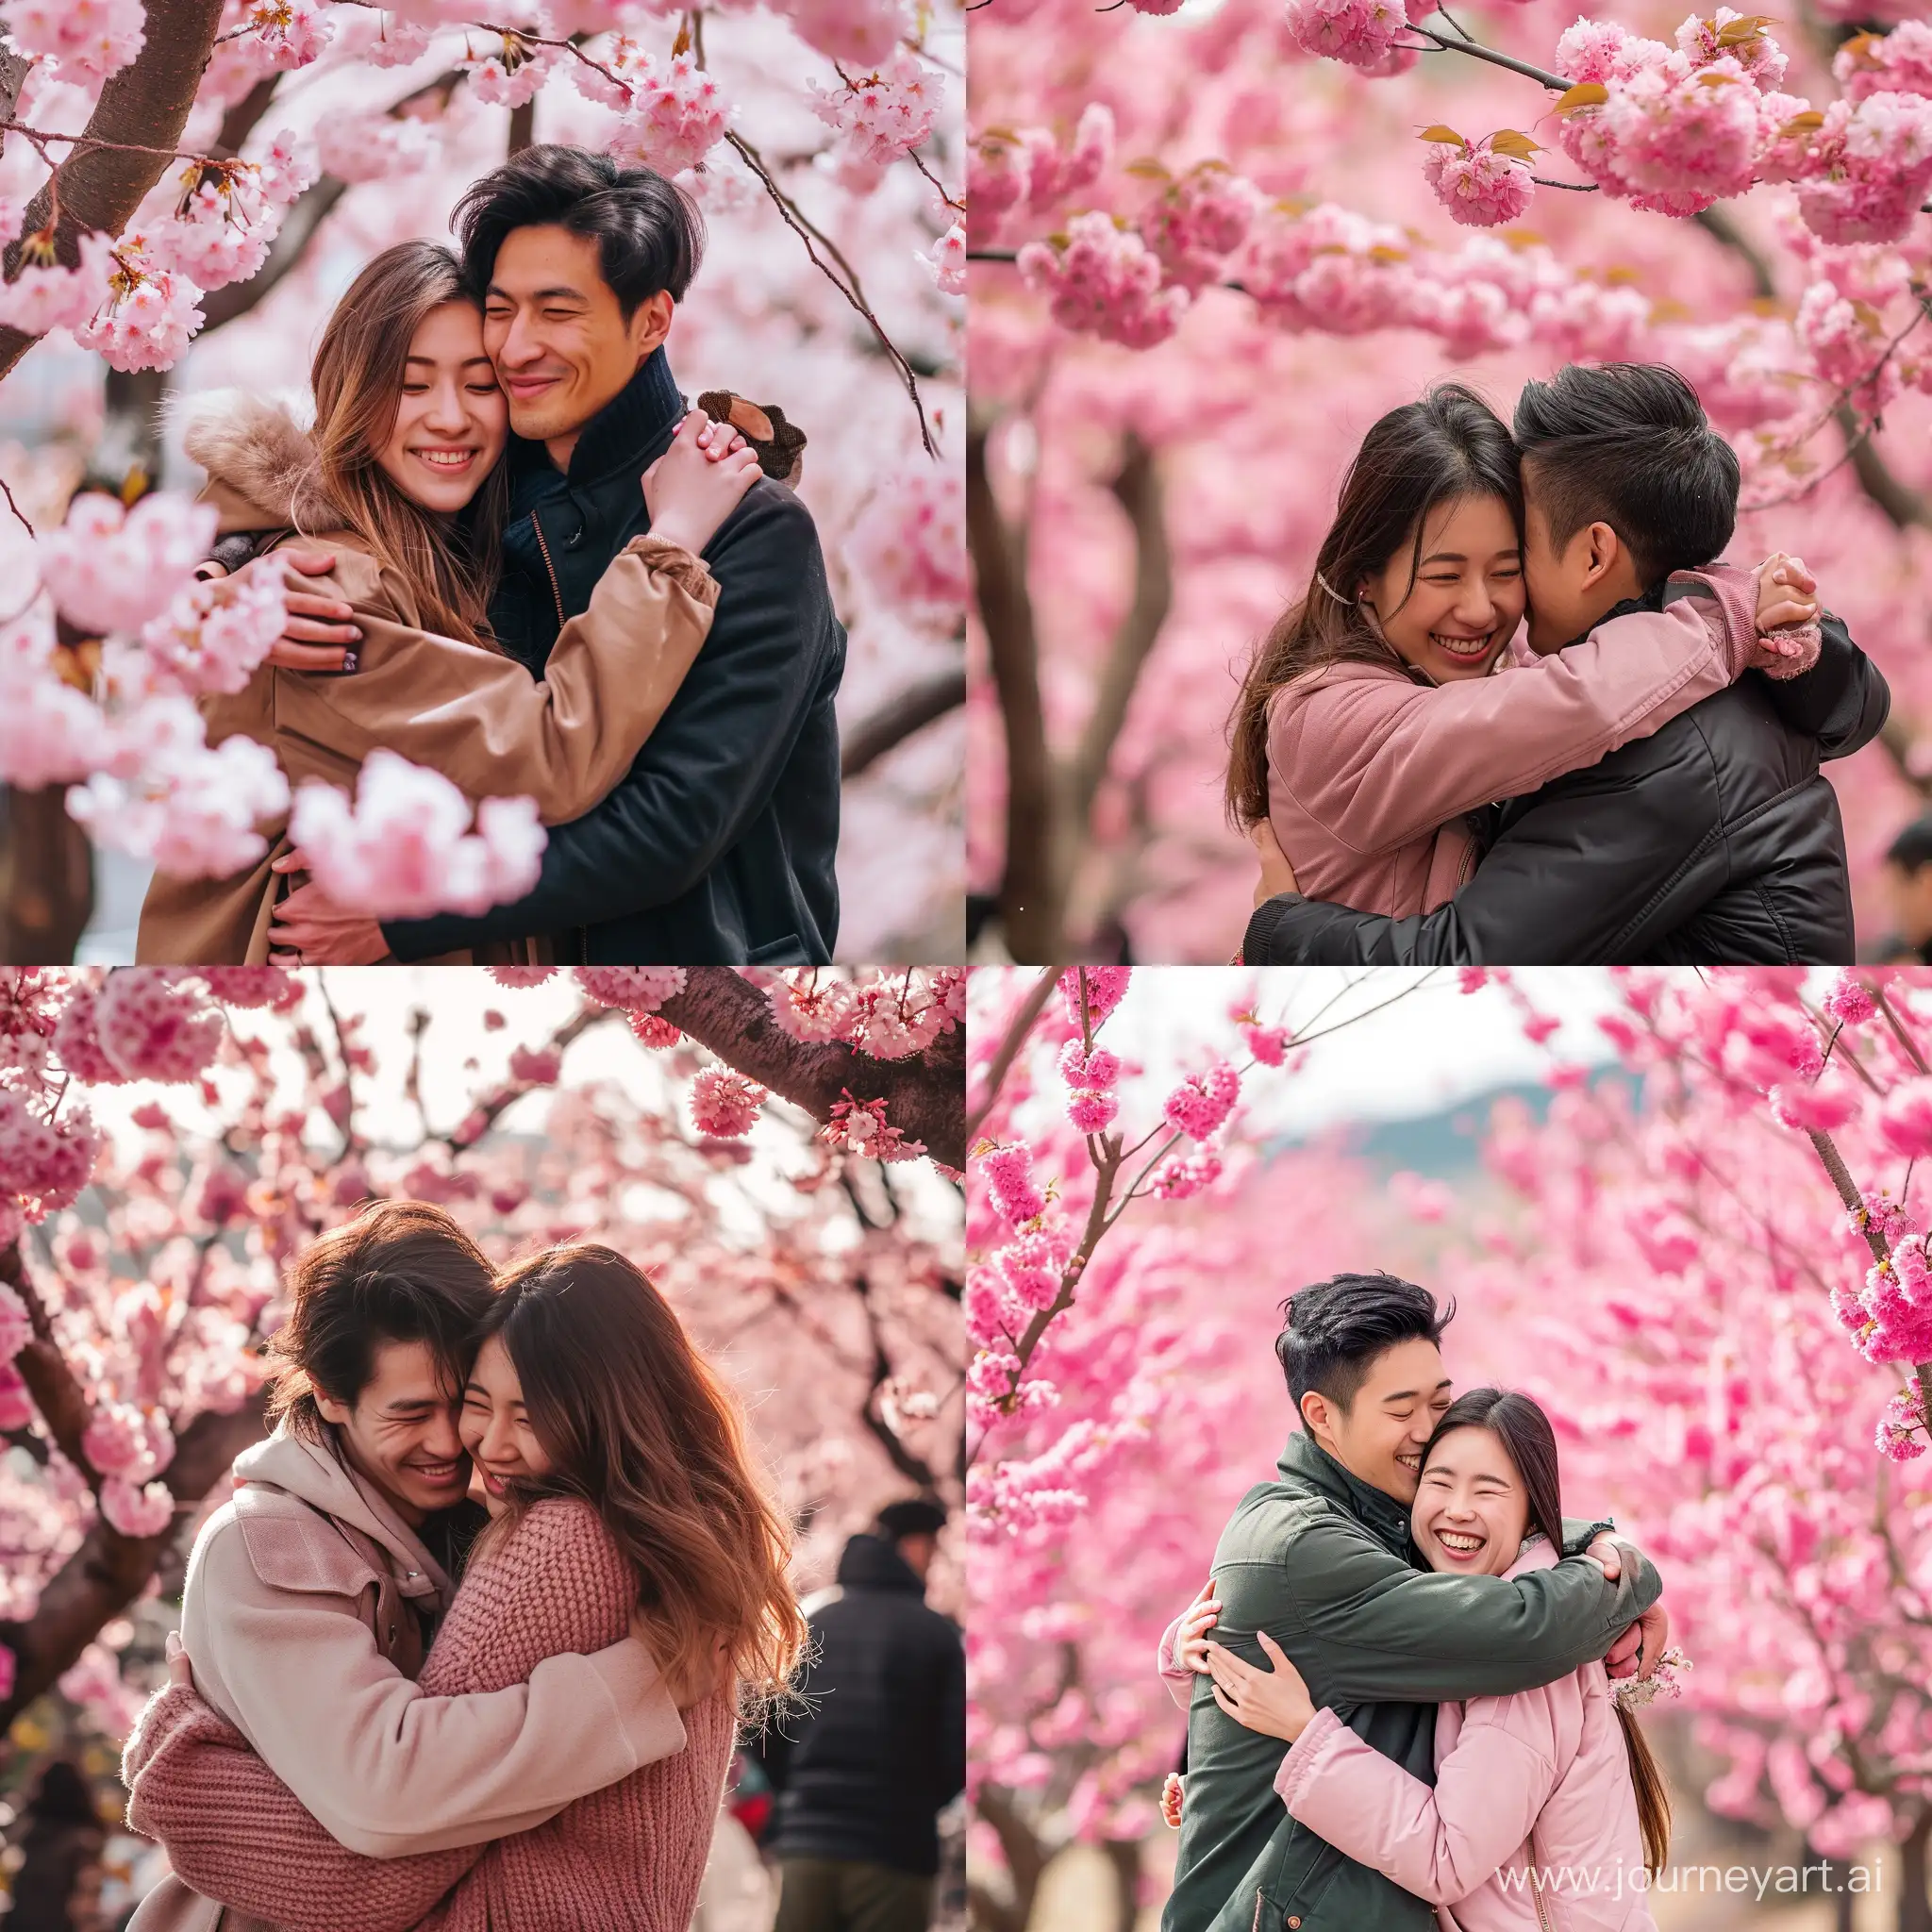 Joyful-Embrace-of-a-Young-Couple-Surrounded-by-Sakura-Blossoms-in-Japan